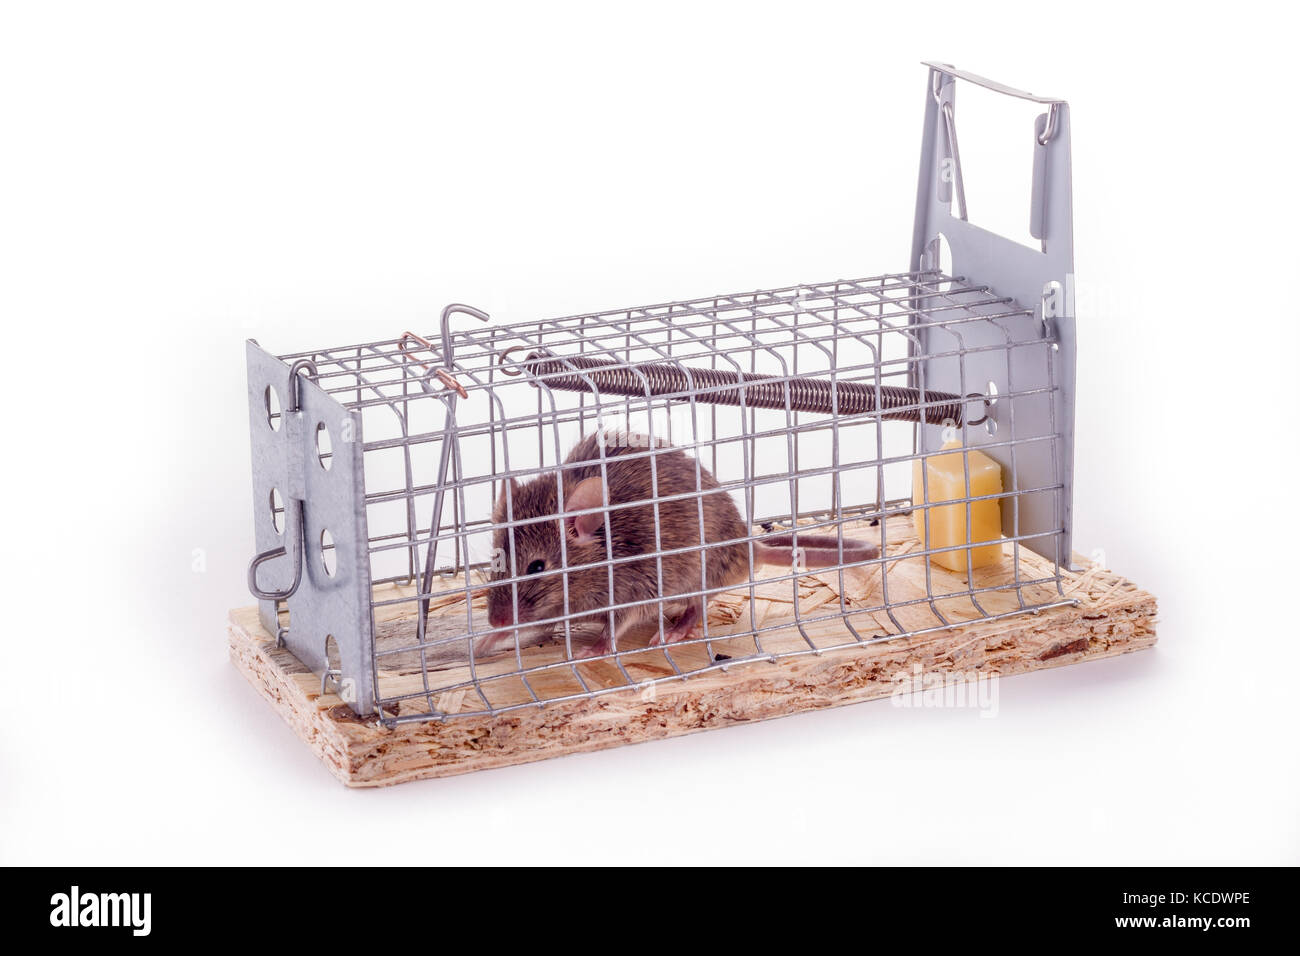 https://c8.alamy.com/comp/KCDWPE/mouse-caught-in-a-live-trap-on-white-background-picture-taken-right-KCDWPE.jpg